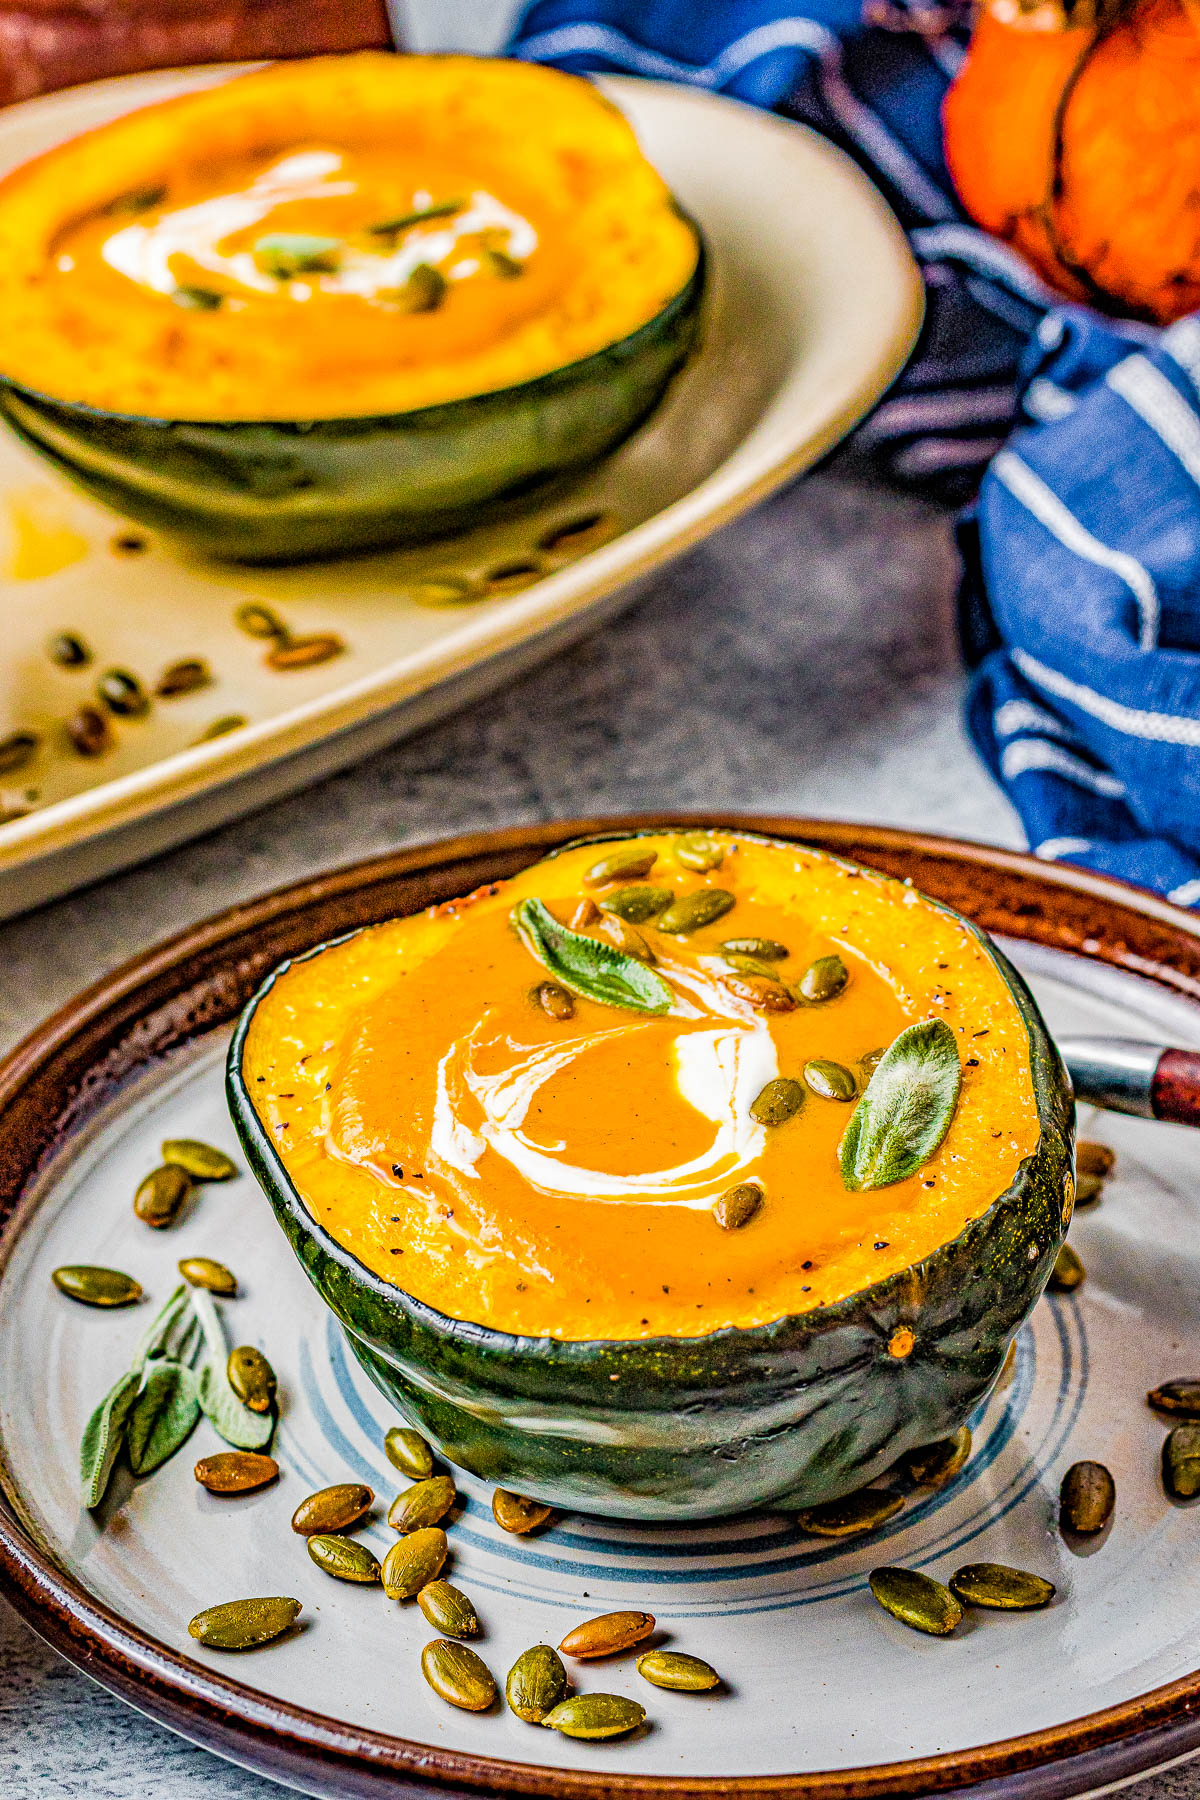 Butternut Squash Soup - Made with roasted butternut and acorn squash, sweet potatoes, carrots, sage, thyme, and more to create a gorgeous, creamy, fall-inspired soup that everyone LOVES! Great as a healthy main dish or a perfect side dish for Thanksgiving or the holidays! Serve it in acorn squash bowls for an even more festive look! 